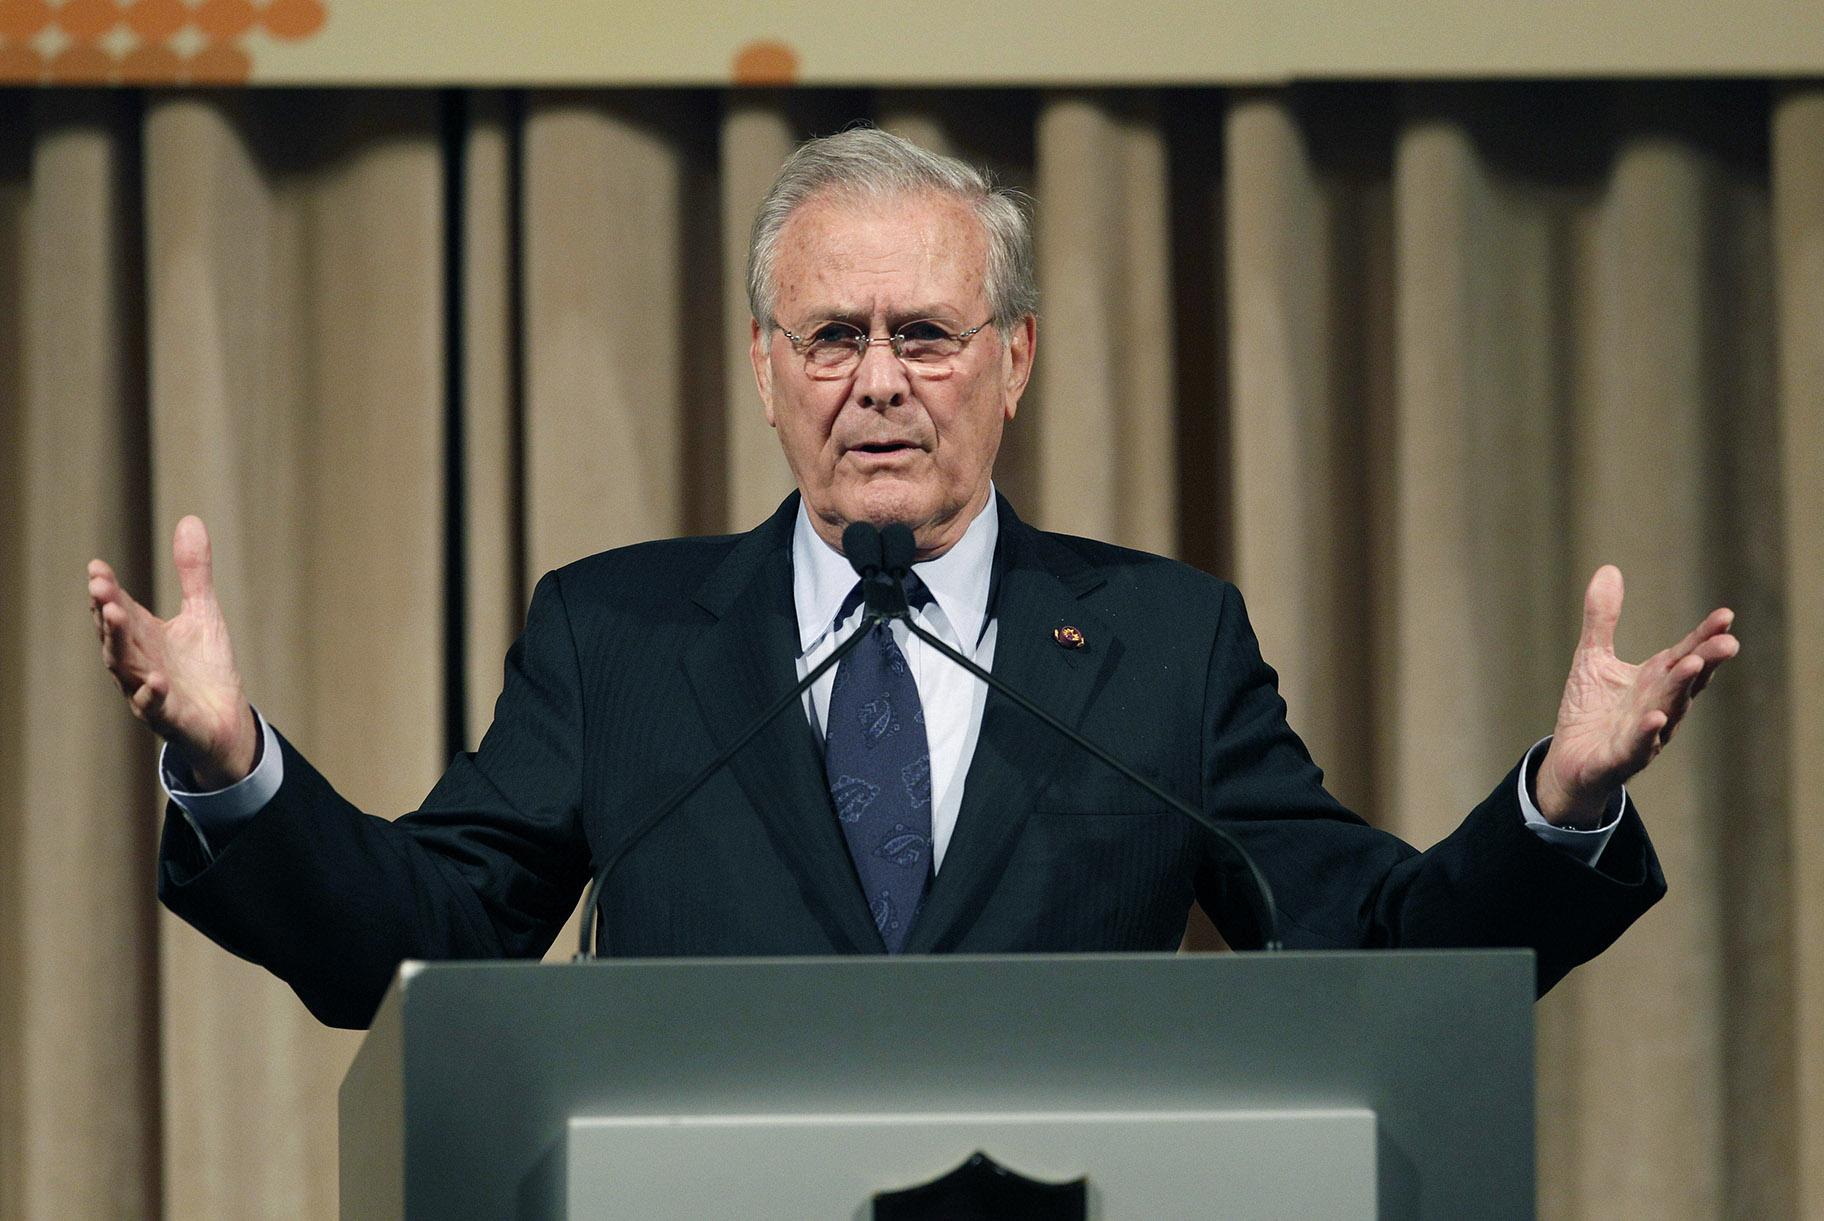 In this Oct. 11, 2011, file photo, former U.S. Secretary of Defense Donald Rumsfeld speaks to politicians and academics during a luncheon on security in rising Asia, in Taipei, Taiwan. The family of Rumsfeld says he has died. He was 88. (AP Photo / Wally Santana, File)